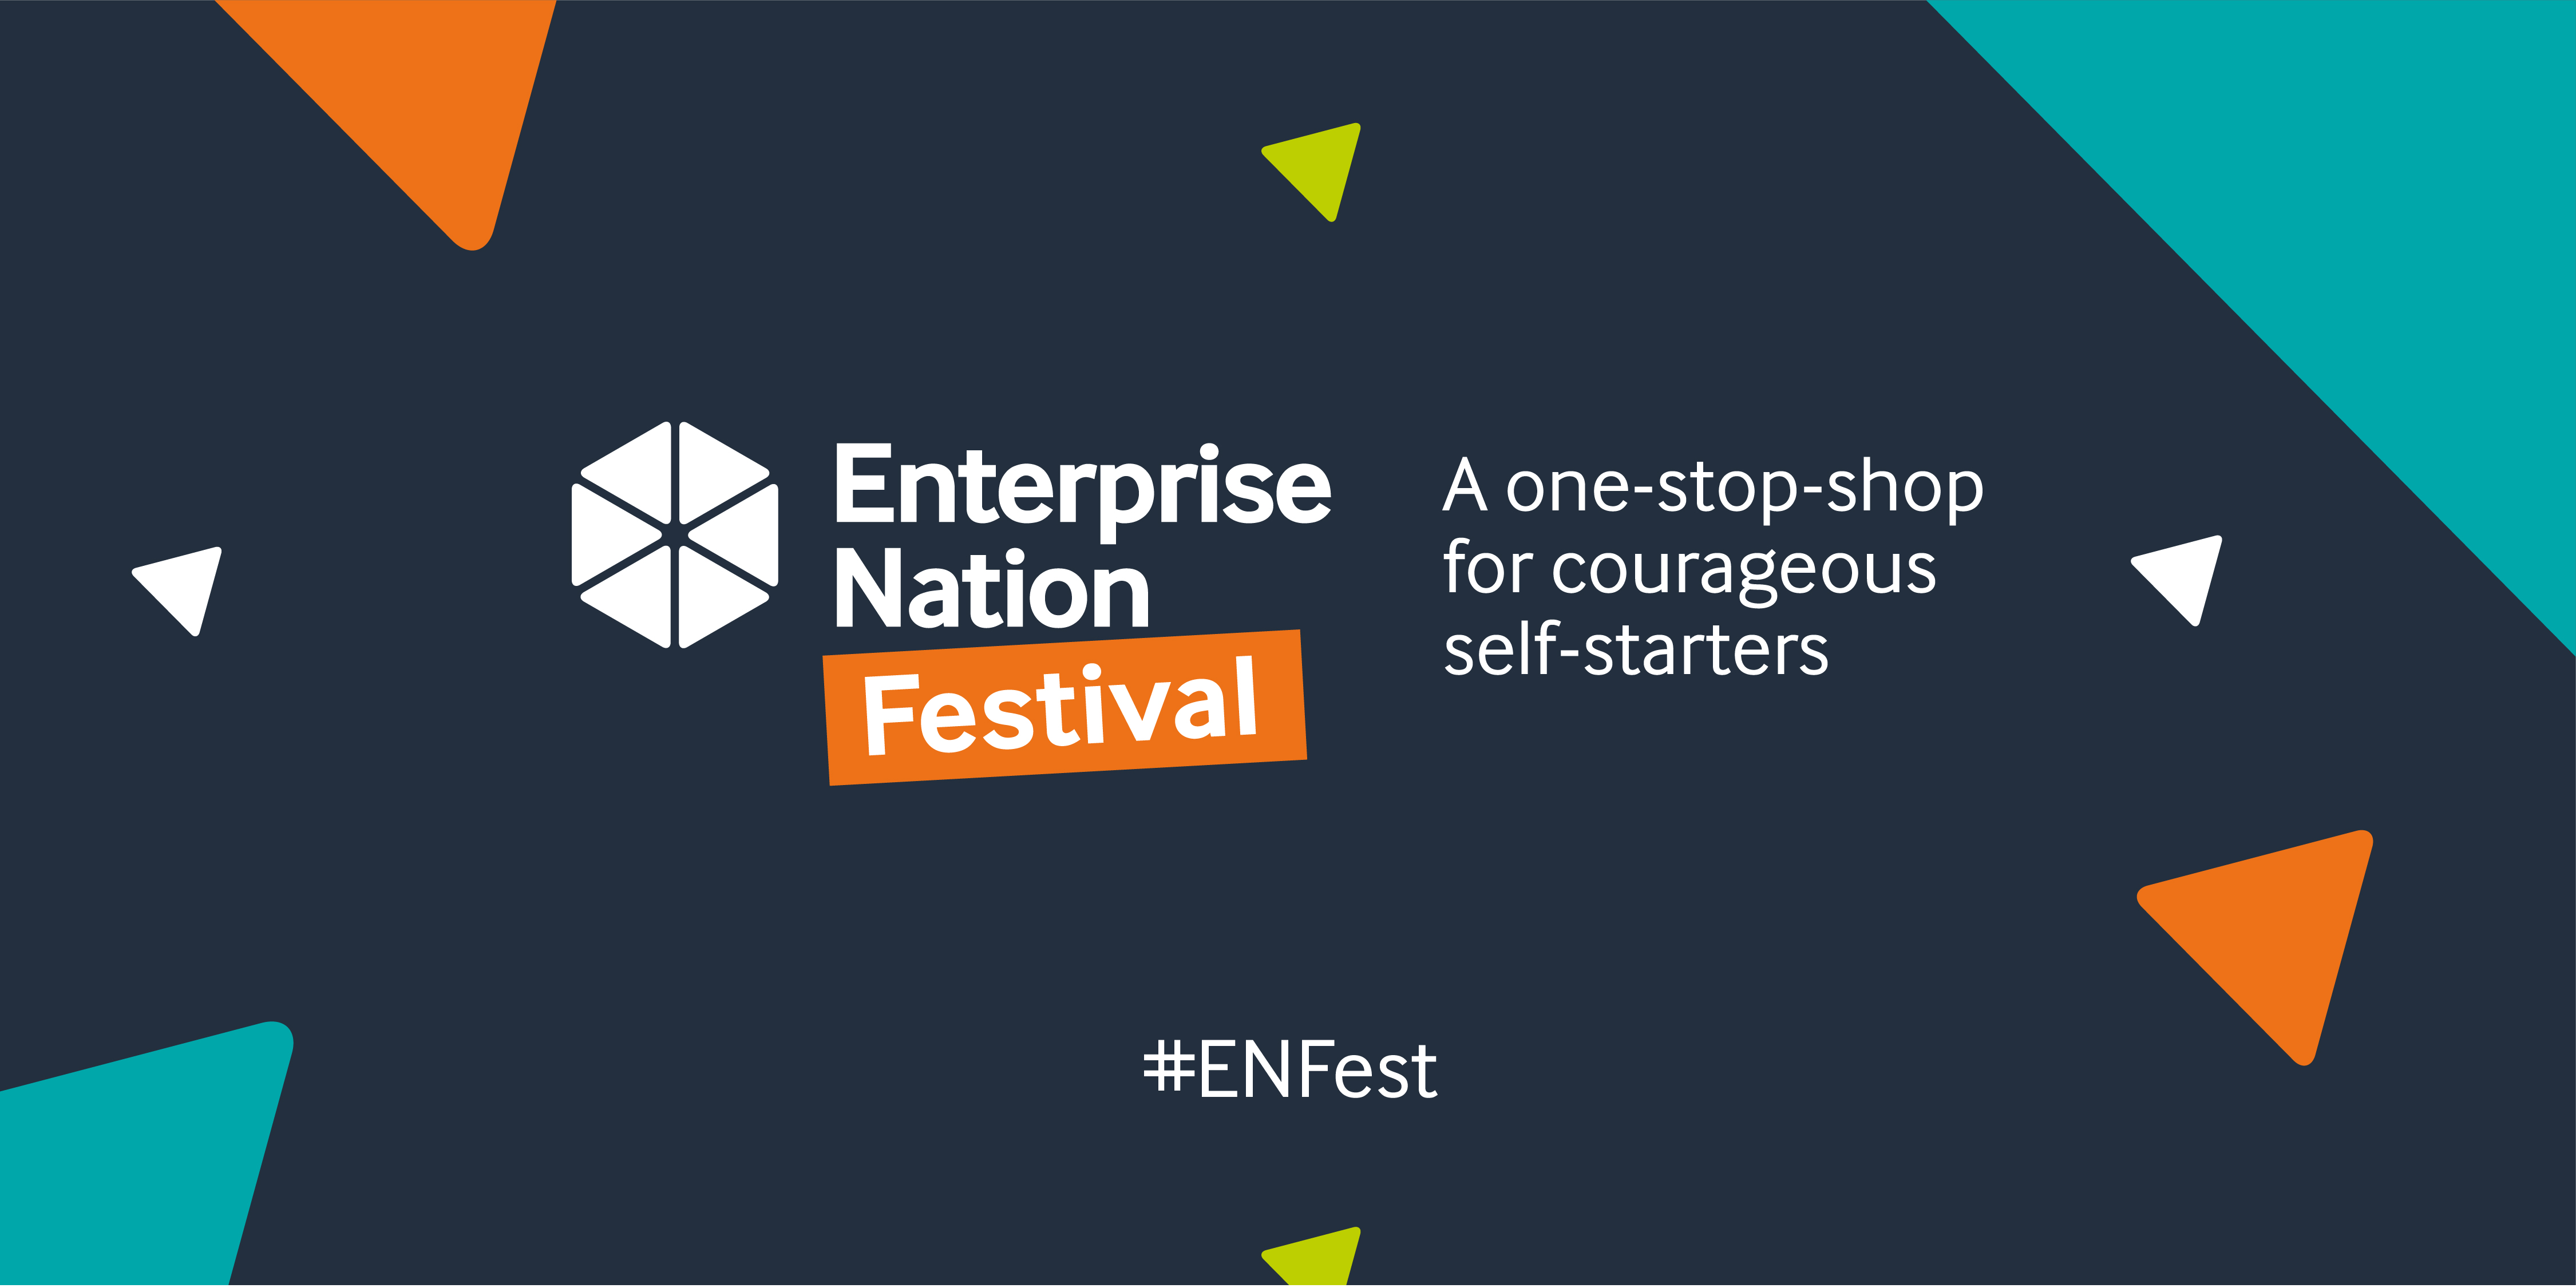 Enterprise Nation Festival: a one-stop-shop for courageous self-starters